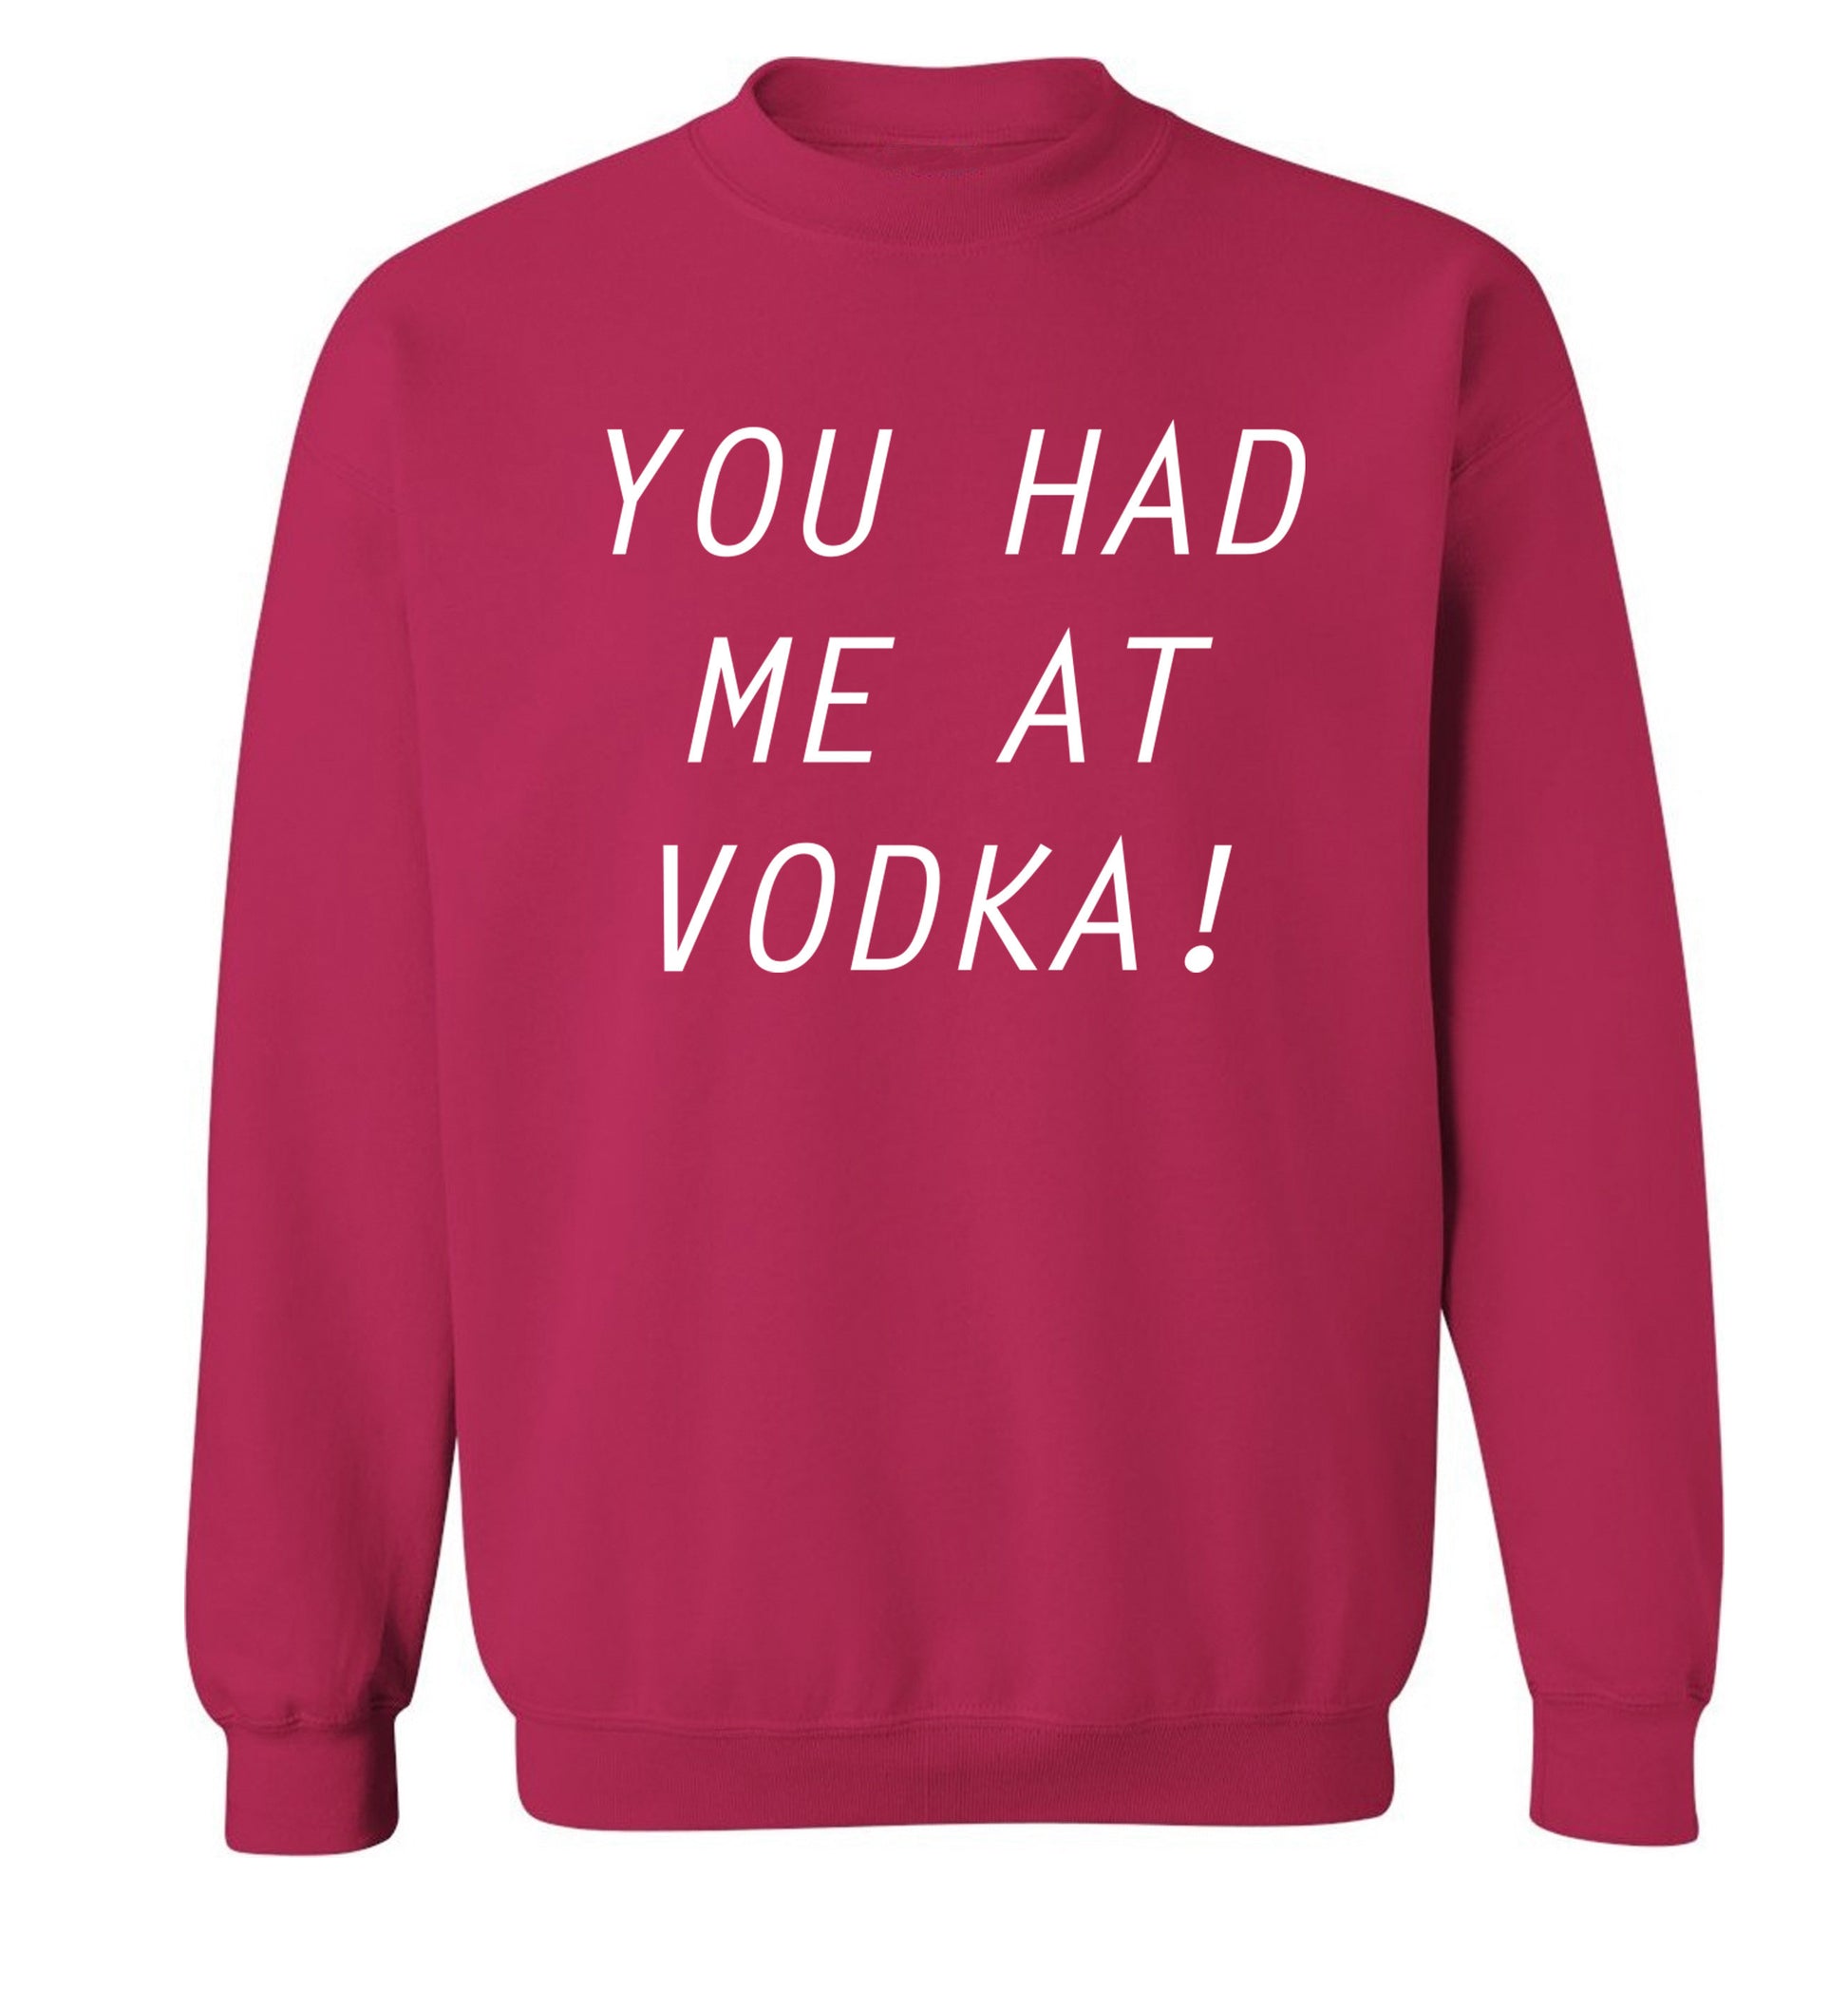 You had me at vodka Adult's unisex pink Sweater 2XL